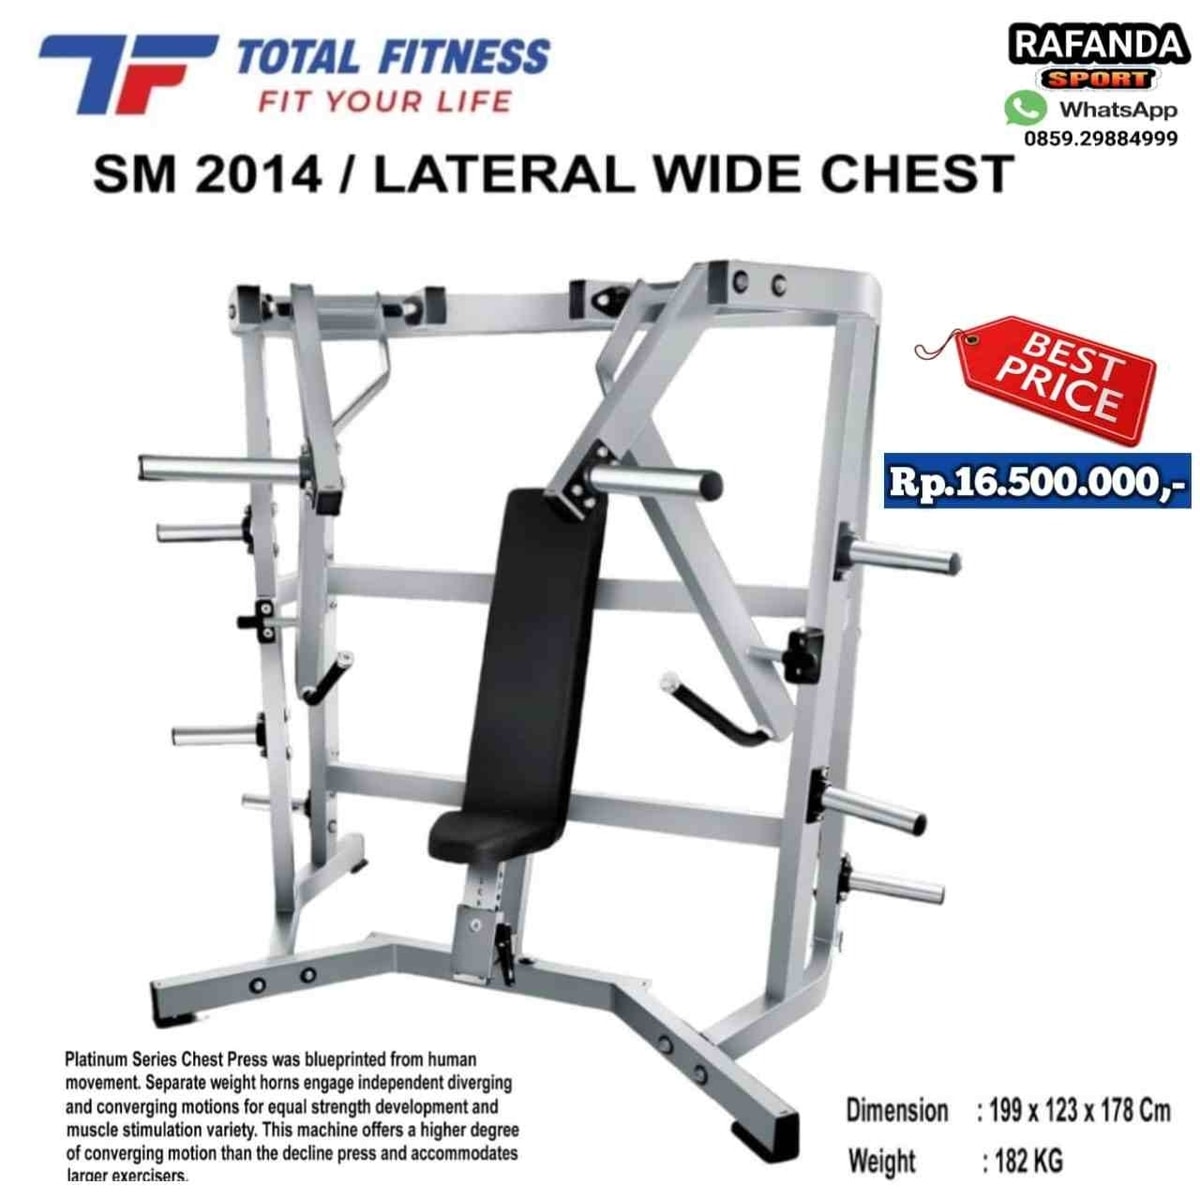 Lateral Wide Chest SM2014